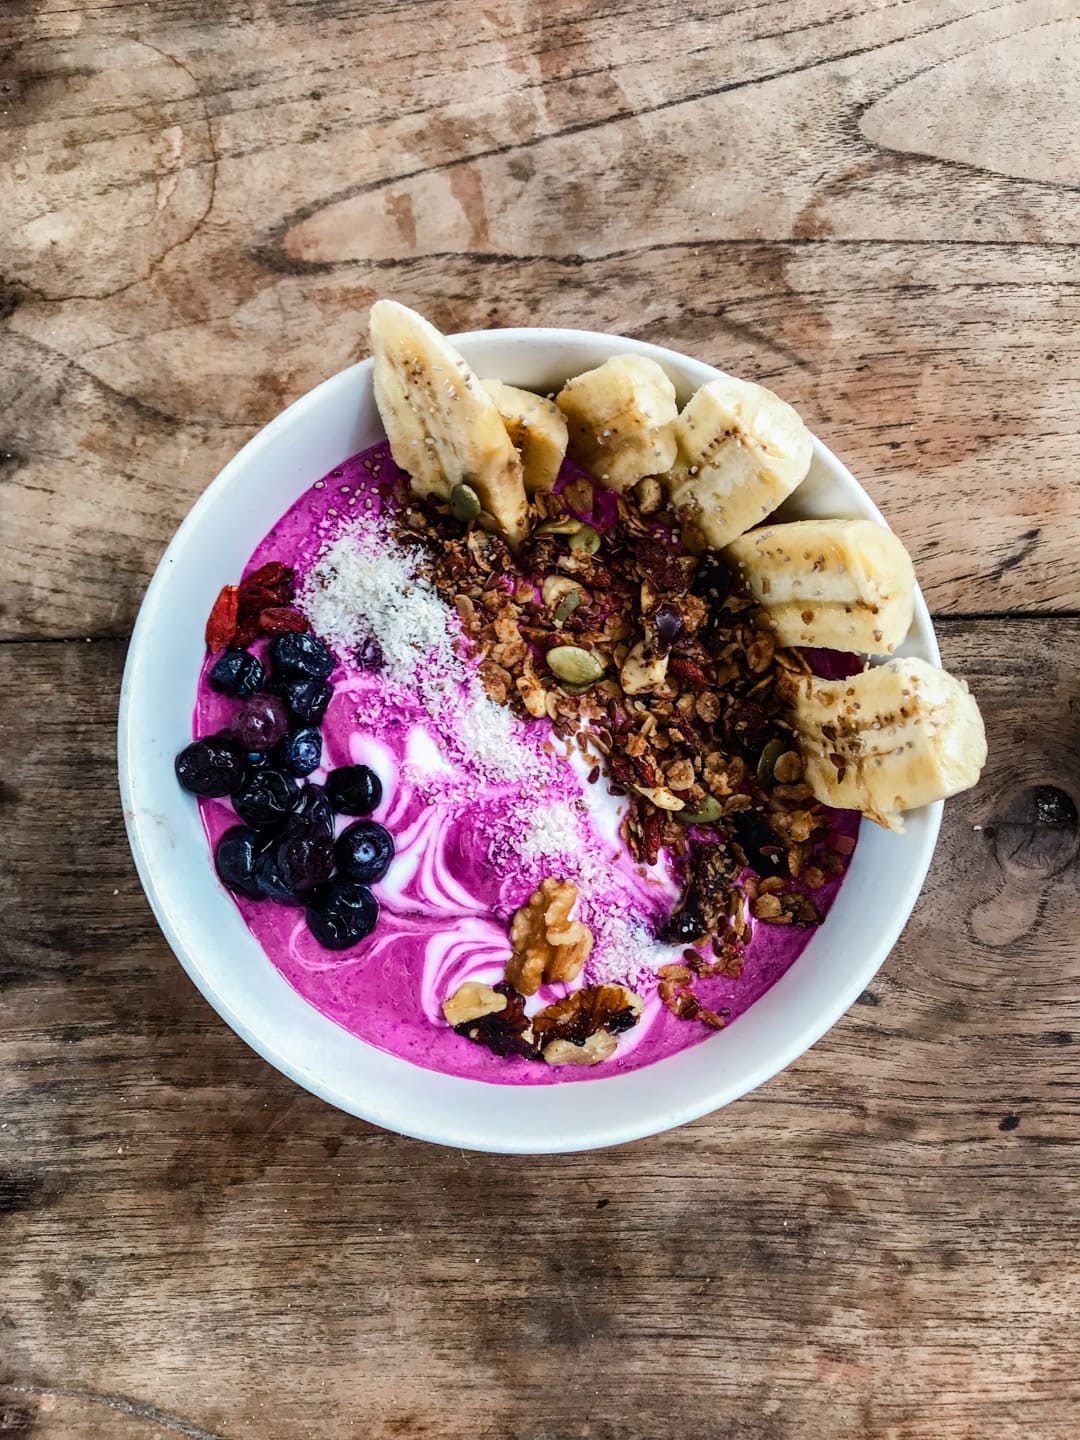 A pink smoothie bowl made from dragonfruit and coconut and topped with fruit, nuts and seeds known as the Pink Panther from Ginger and Jamu in Lembongan, Bali.